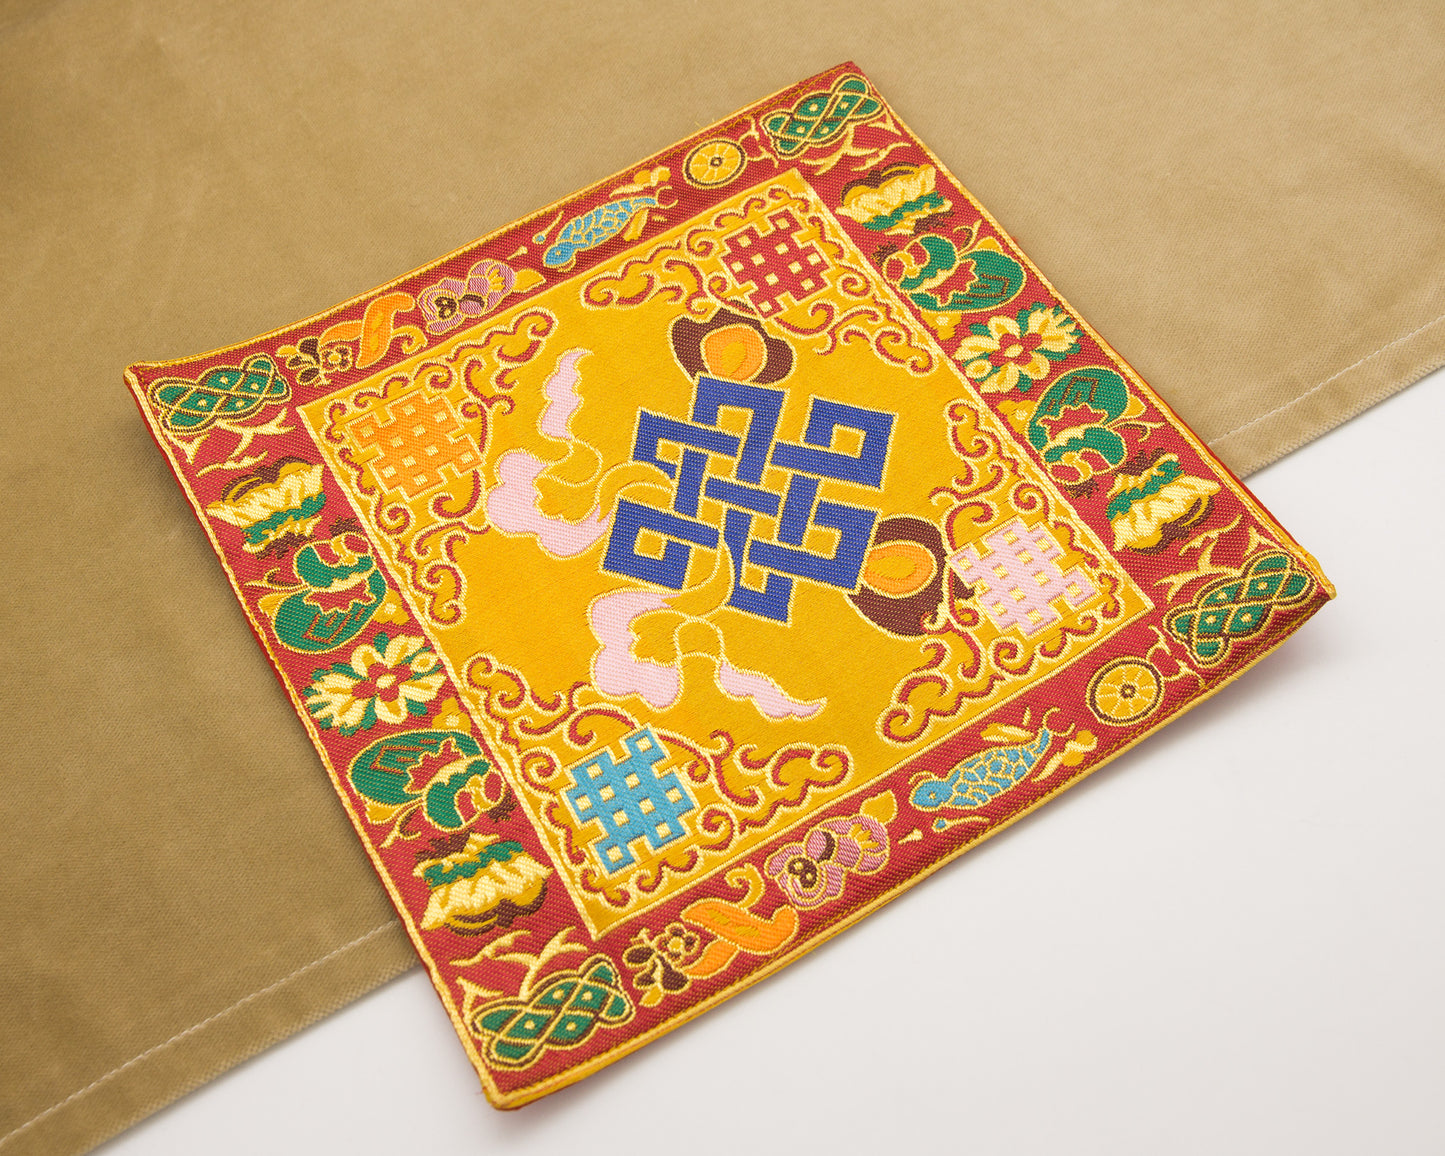 Square Brocade Cloth / Bell & Dorje Mat – Endless Knot